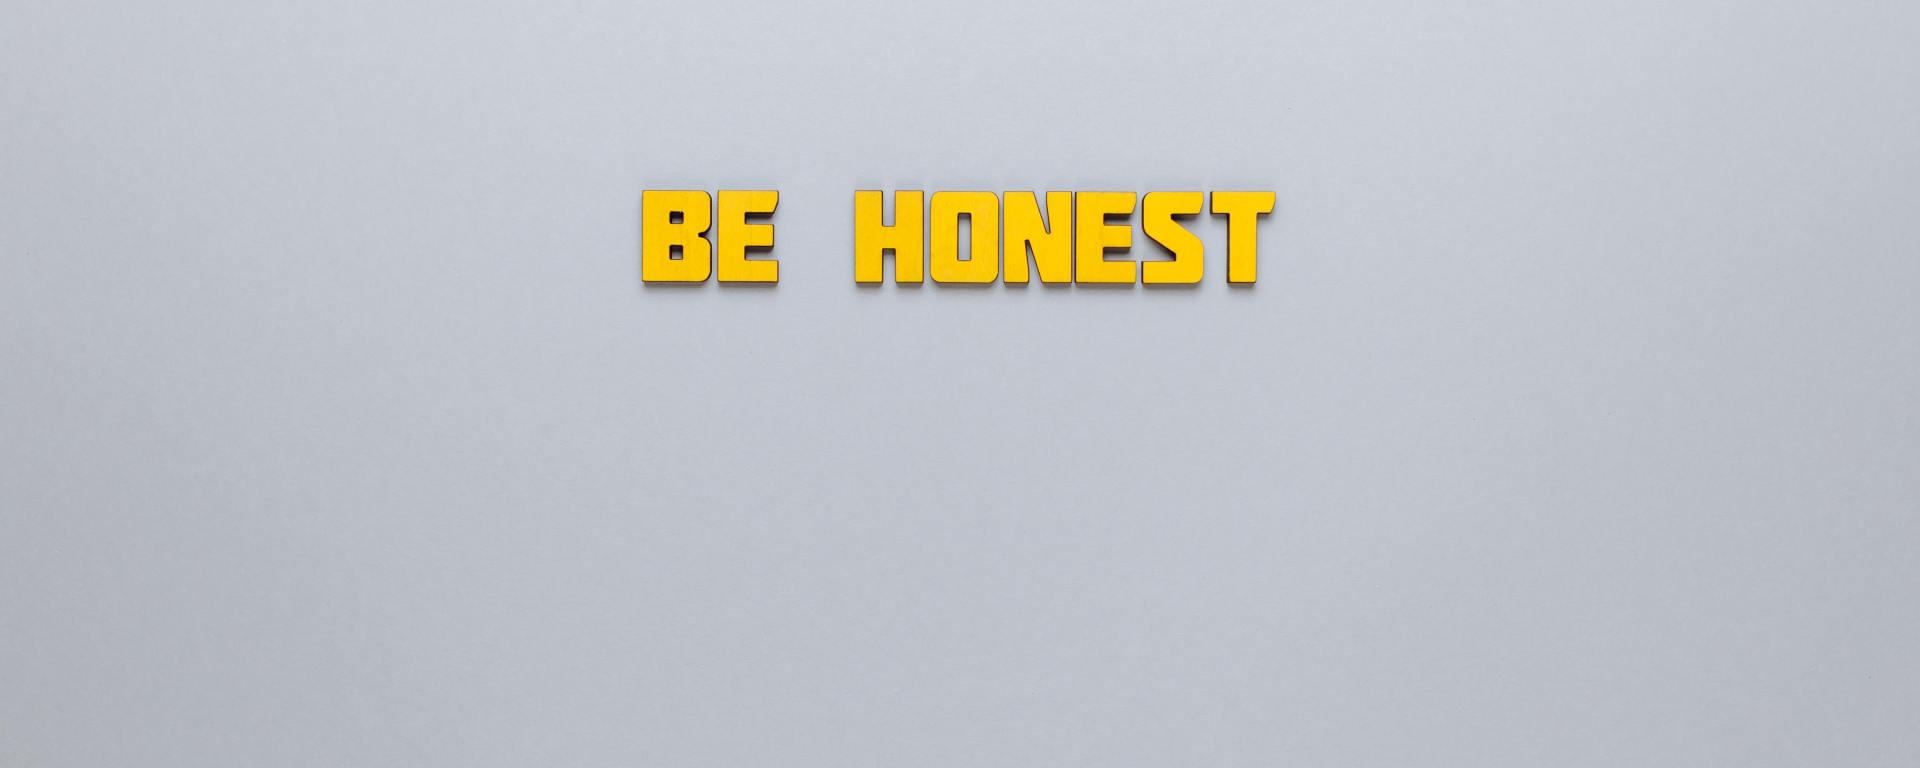 white background with yellow text that says "be honest"